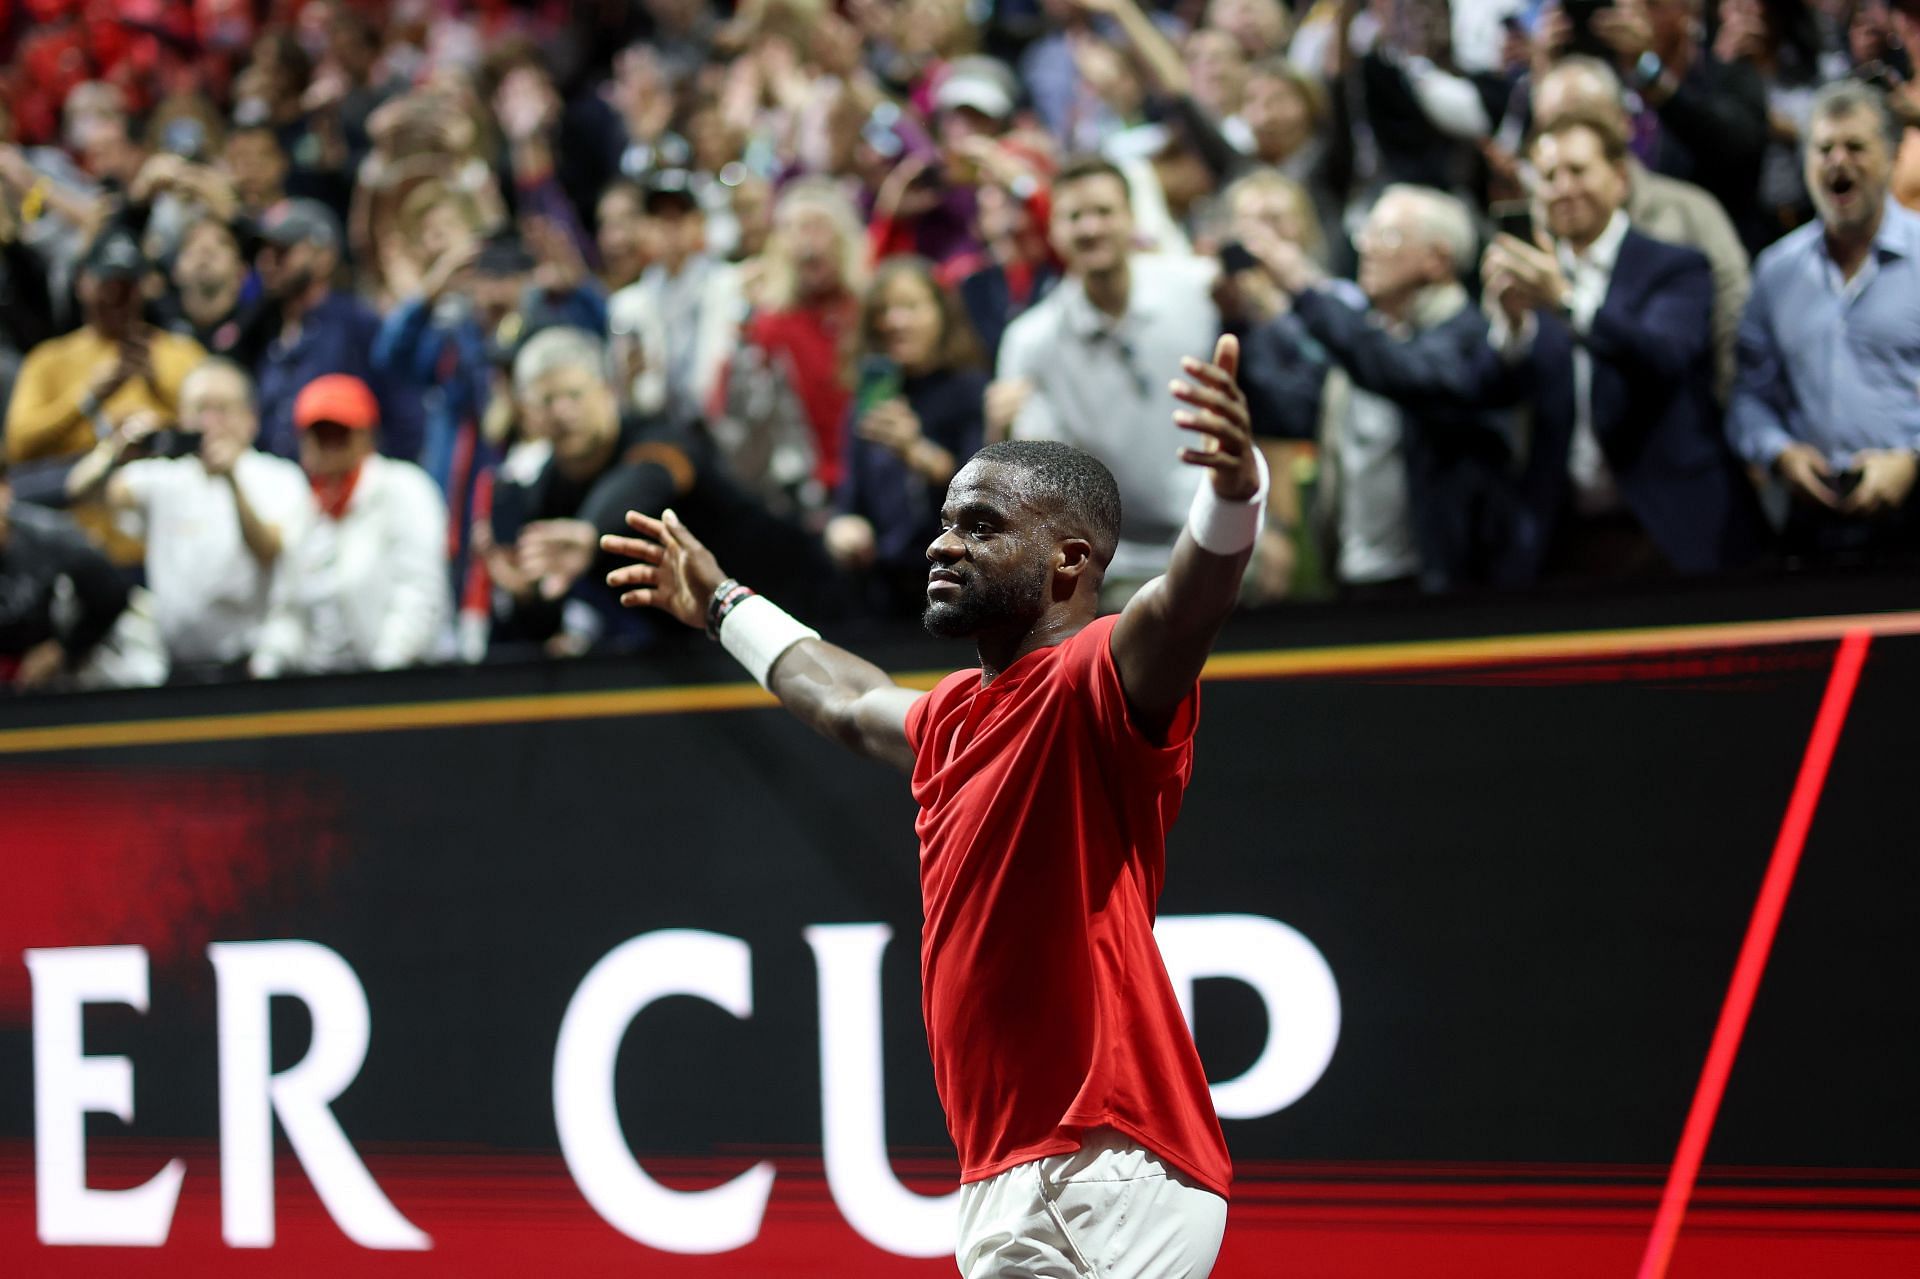 Frances Tiafoe at the 2022 Laver Cup